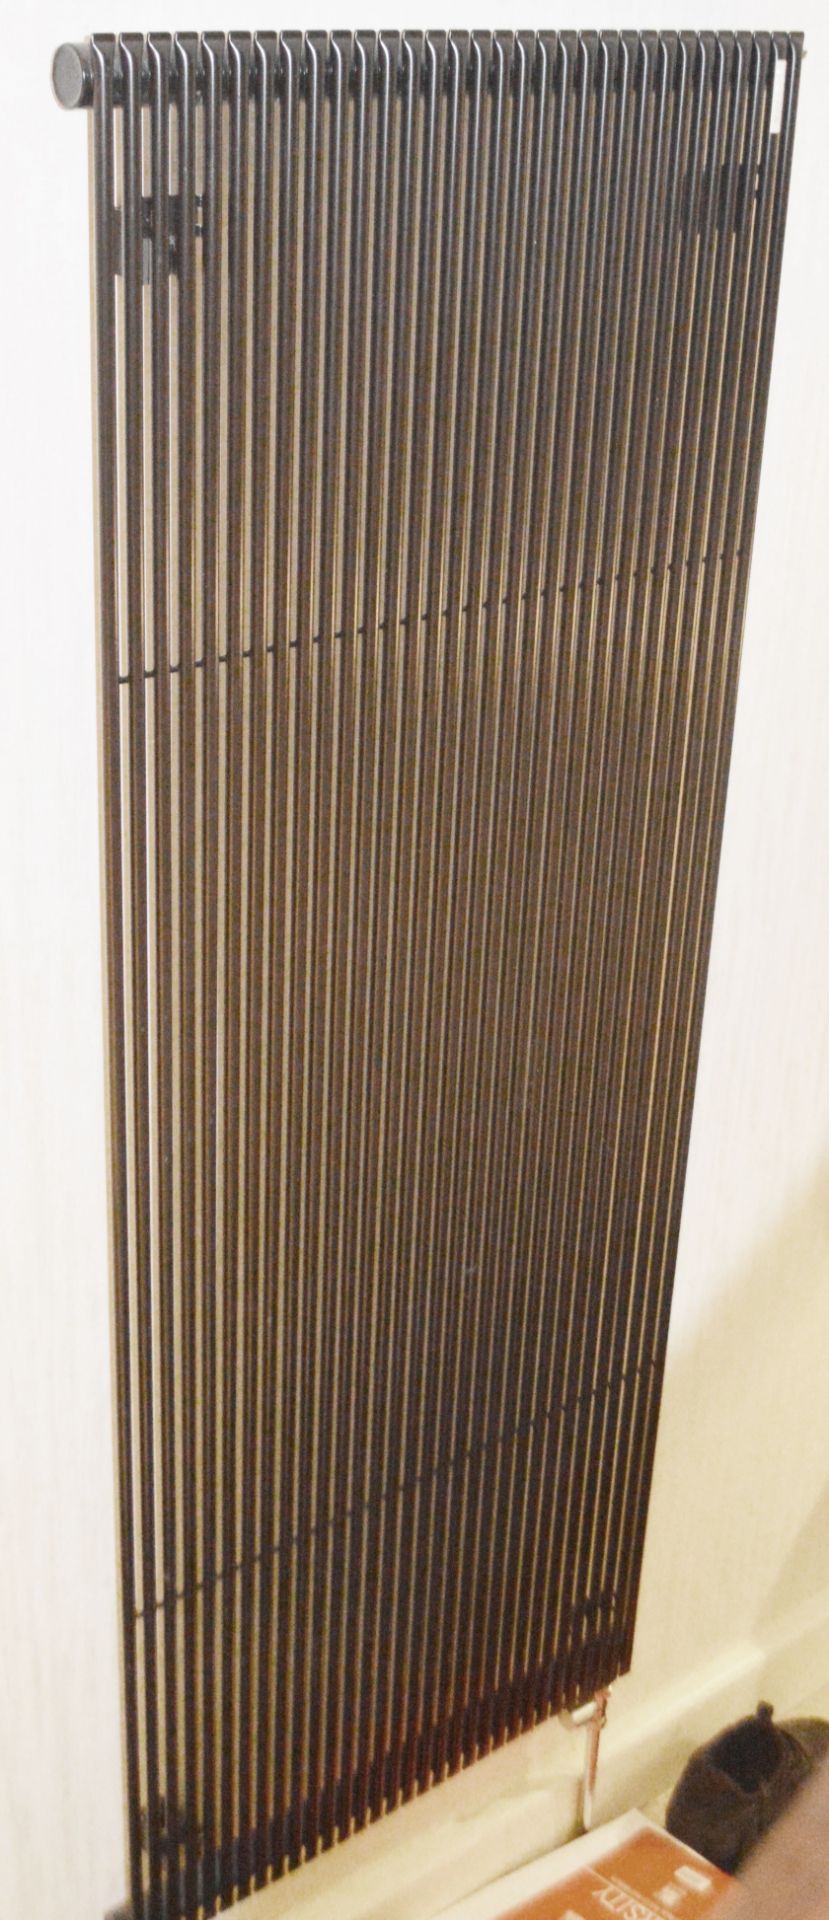 1 x Stylish Wall Mounted Radiator In Black - To Be Removed From A Exclusive Property In Bowdon  -